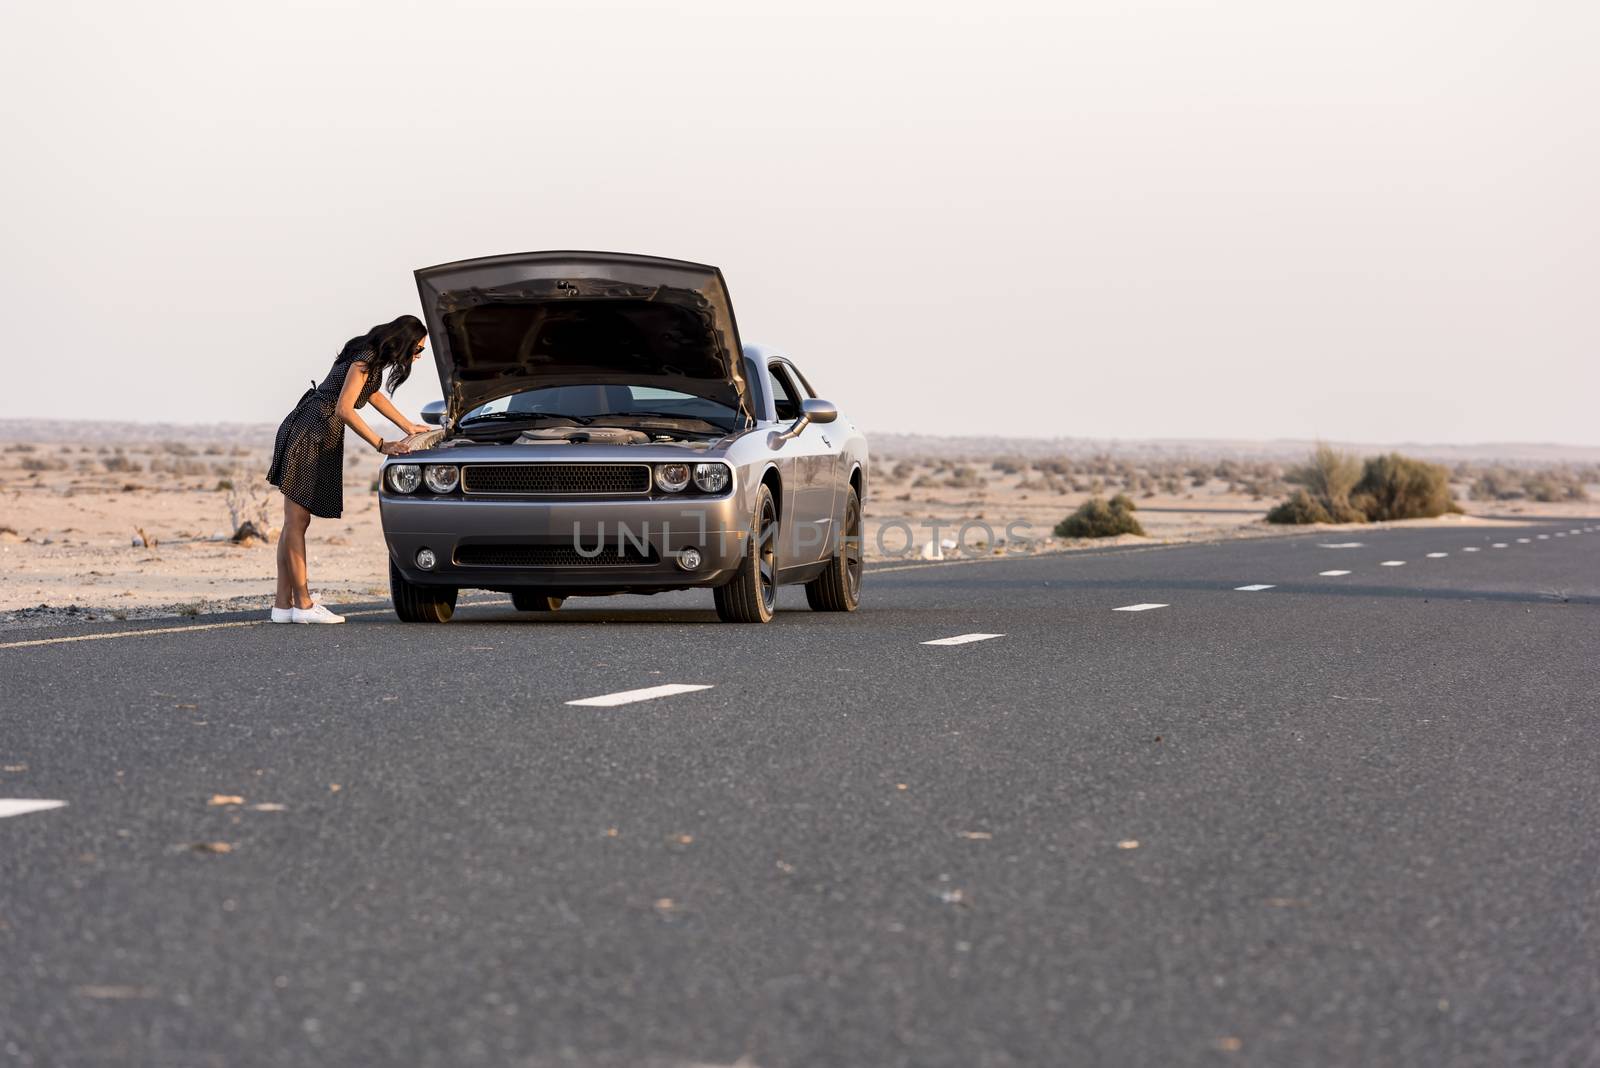 Car Breakdown with Woman checking the engine in the road in the middle of the desert